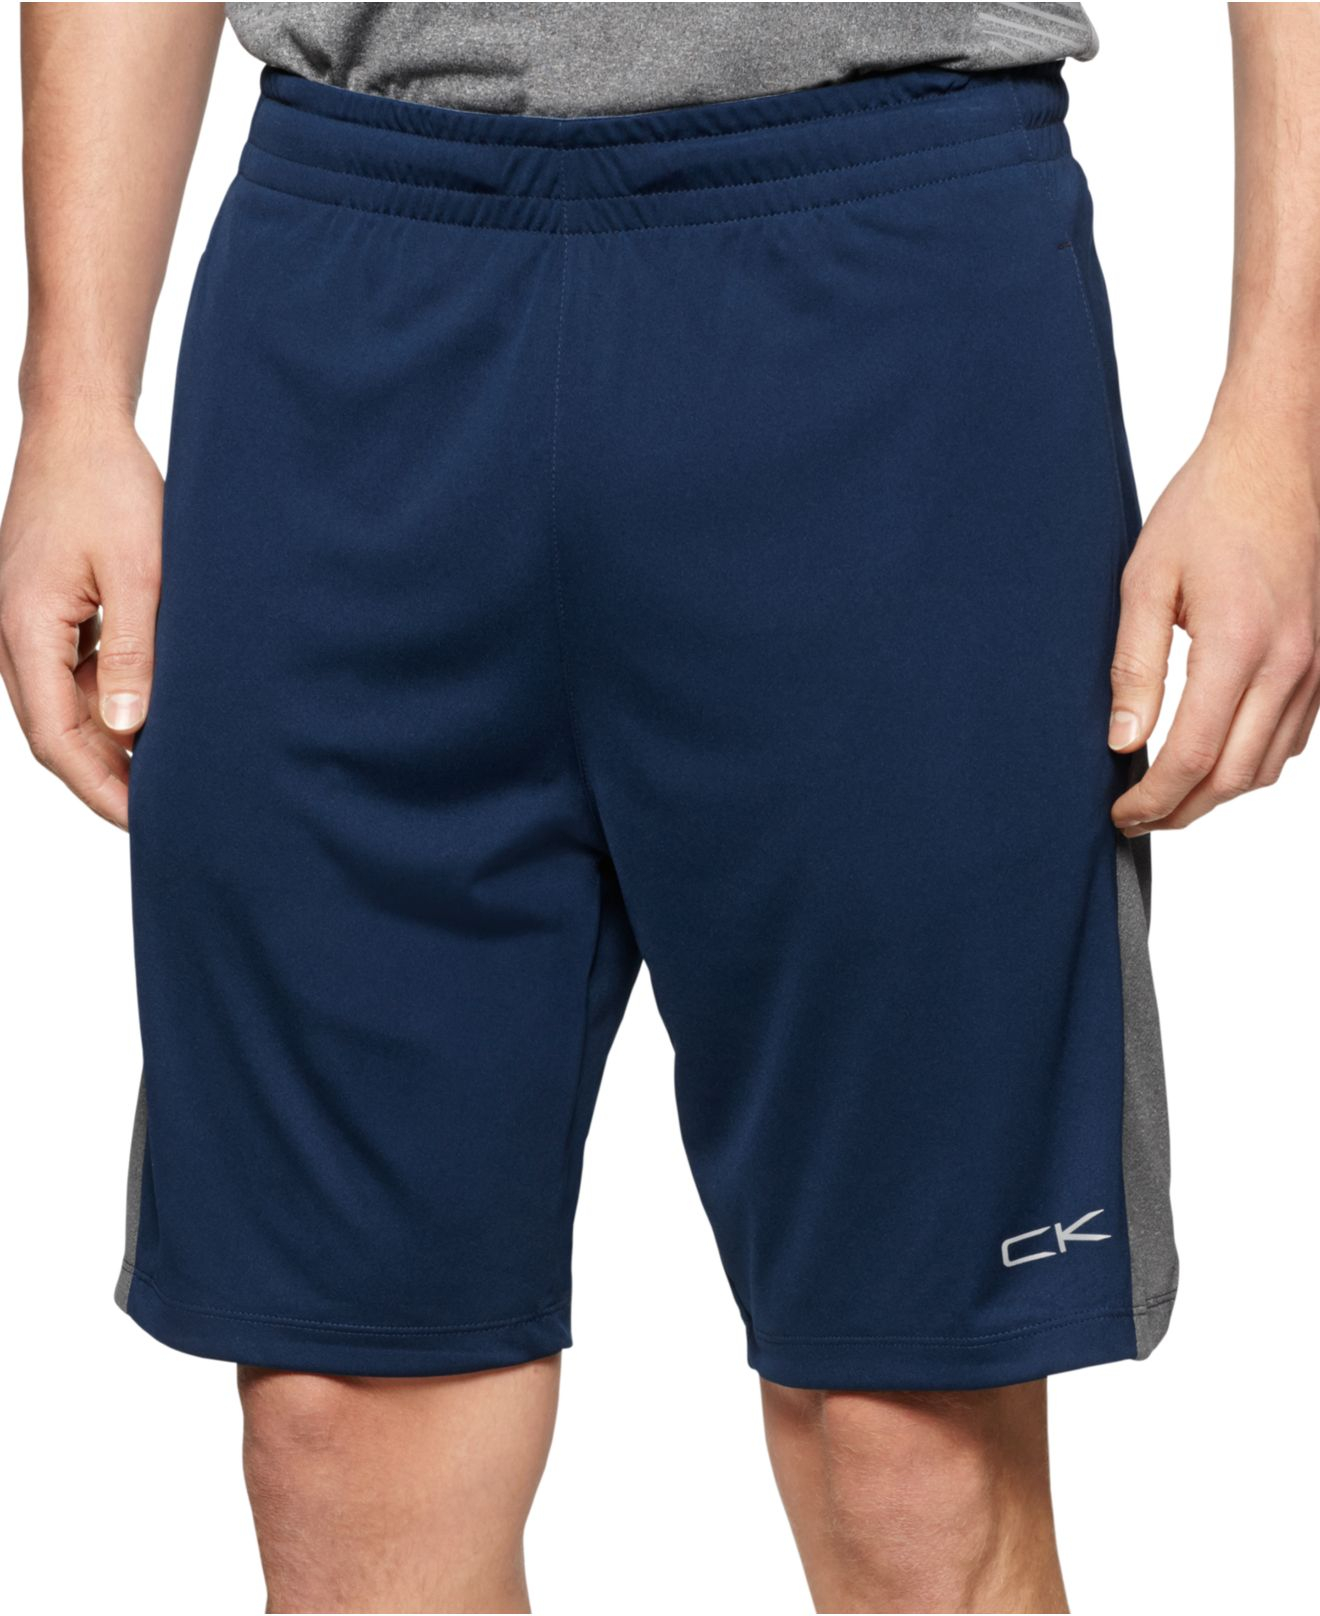 Calvin Klein Performance Colorblocked Gym Shorts in Blue for Men - Lyst